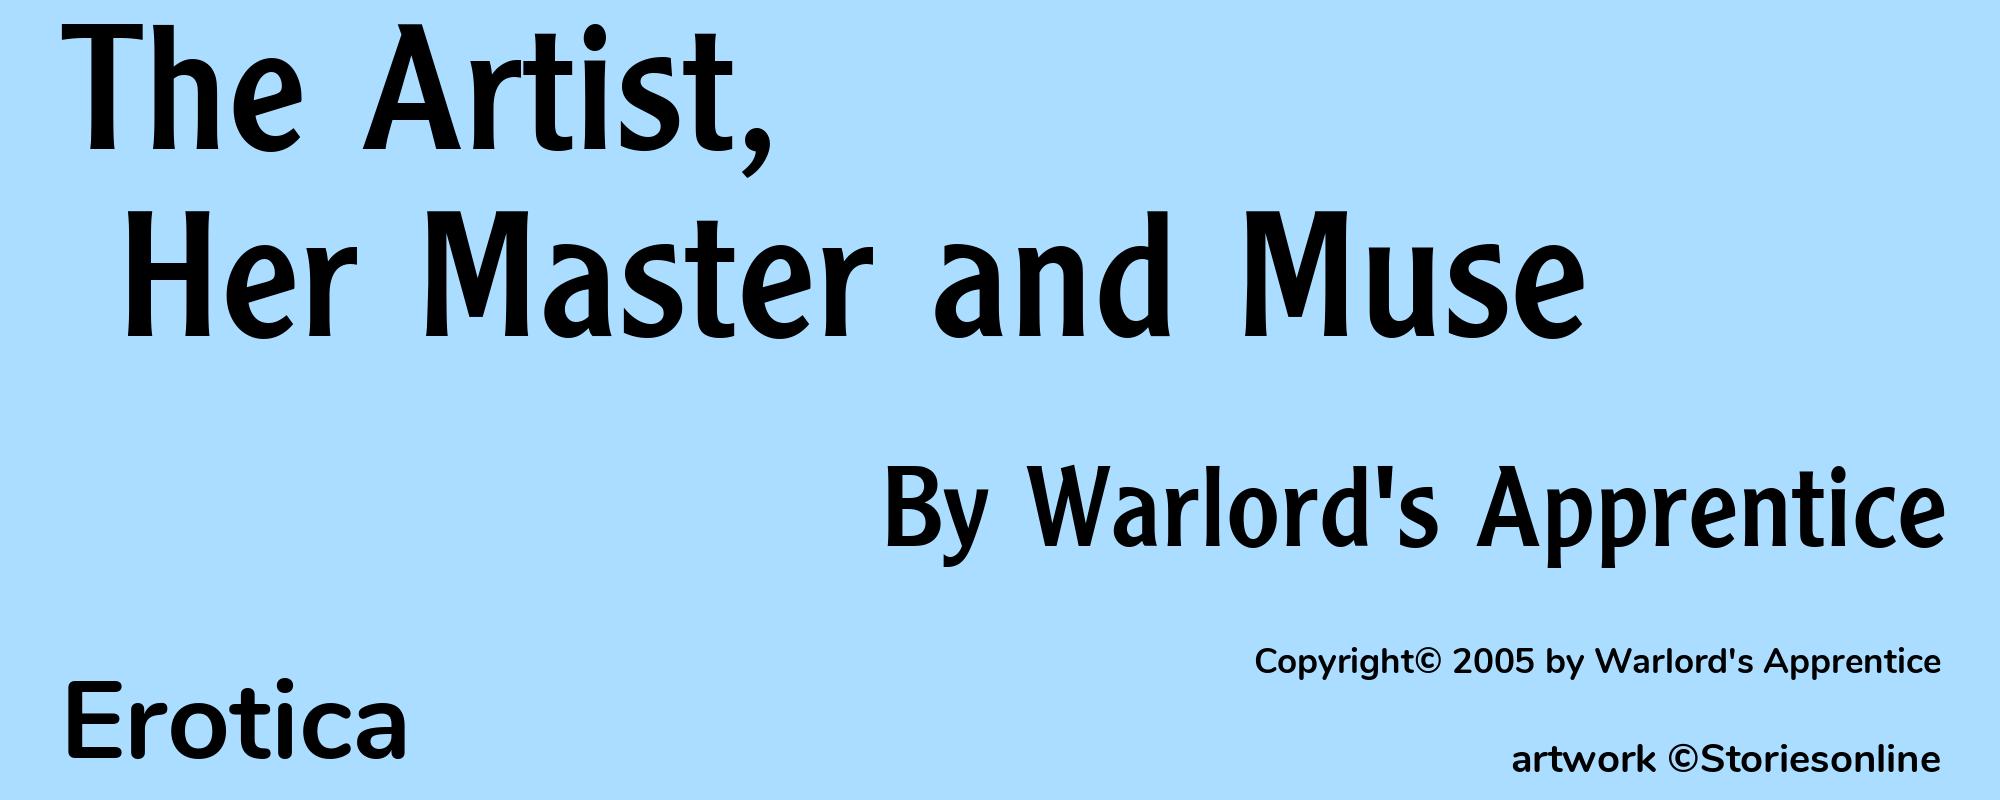 The Artist, Her Master and Muse - Cover